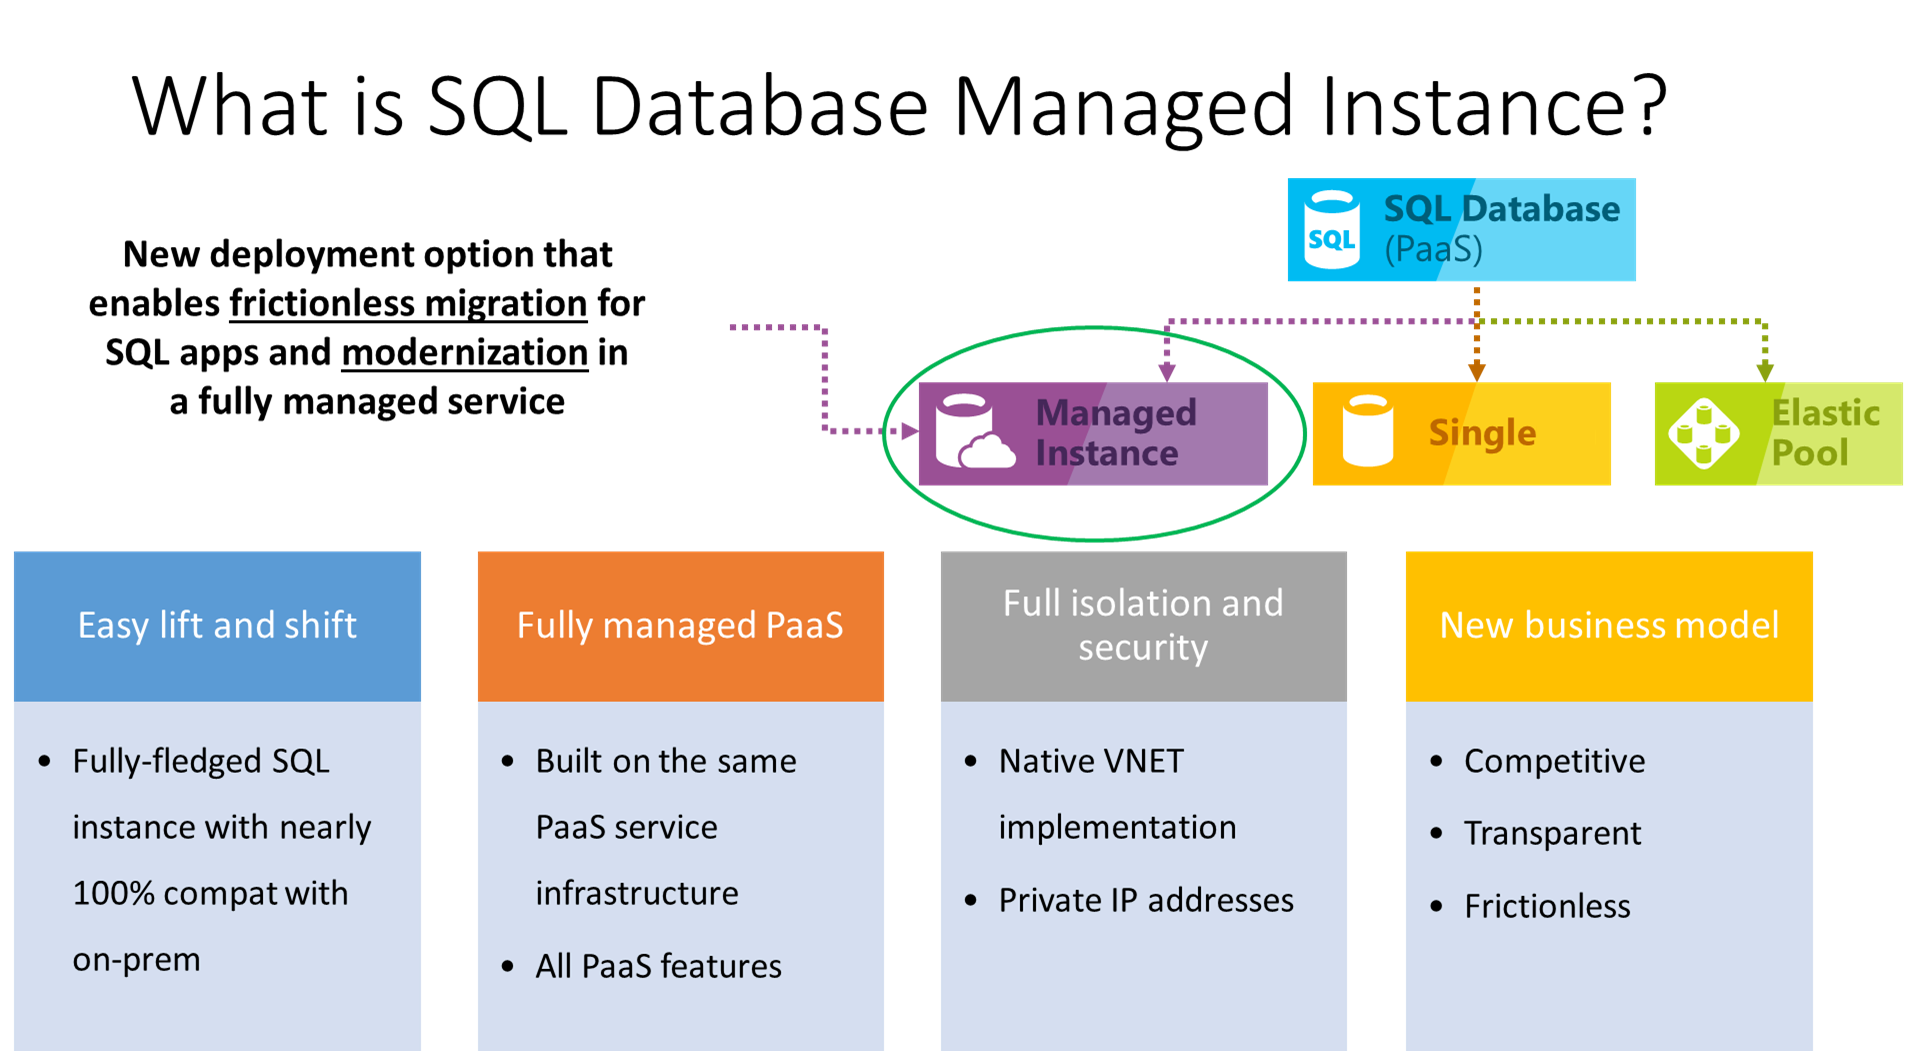 Azure SQL Managed Instance by Microsoft